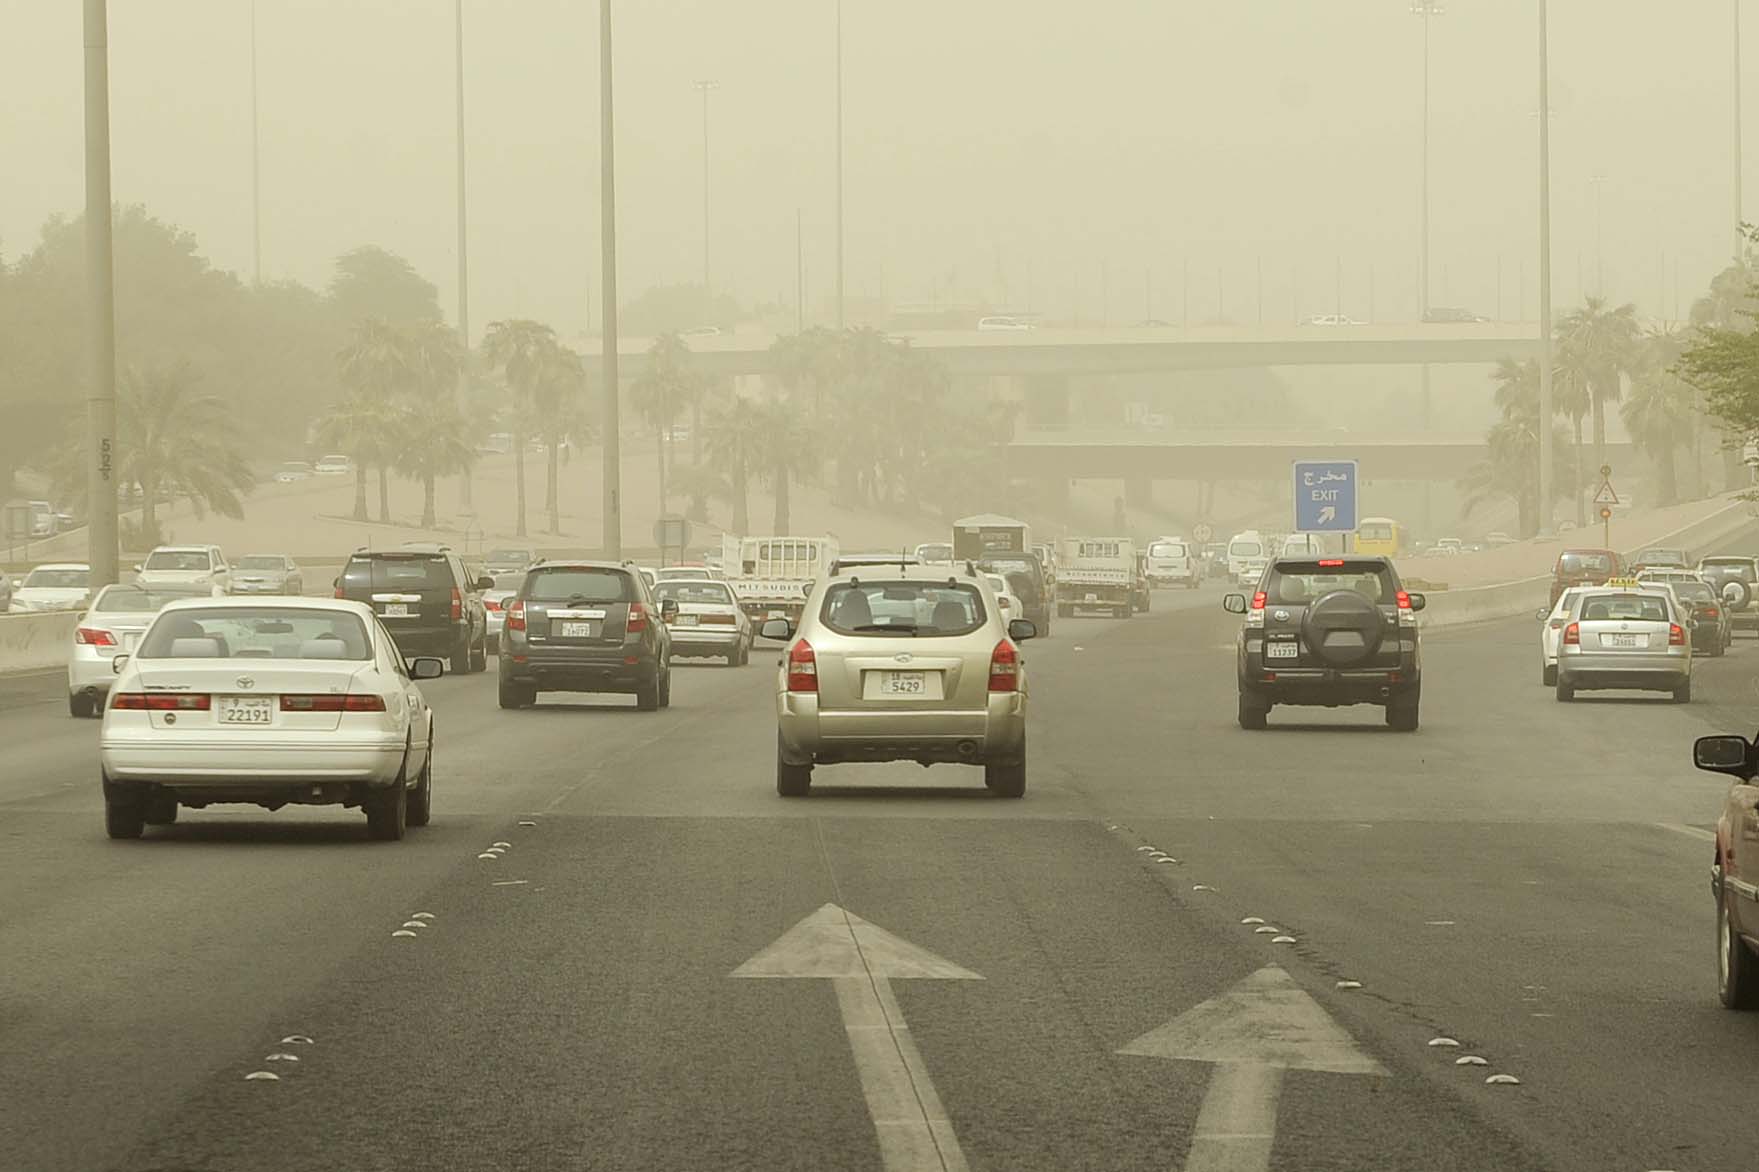 Bad weather causing low visibility in Kuwait City